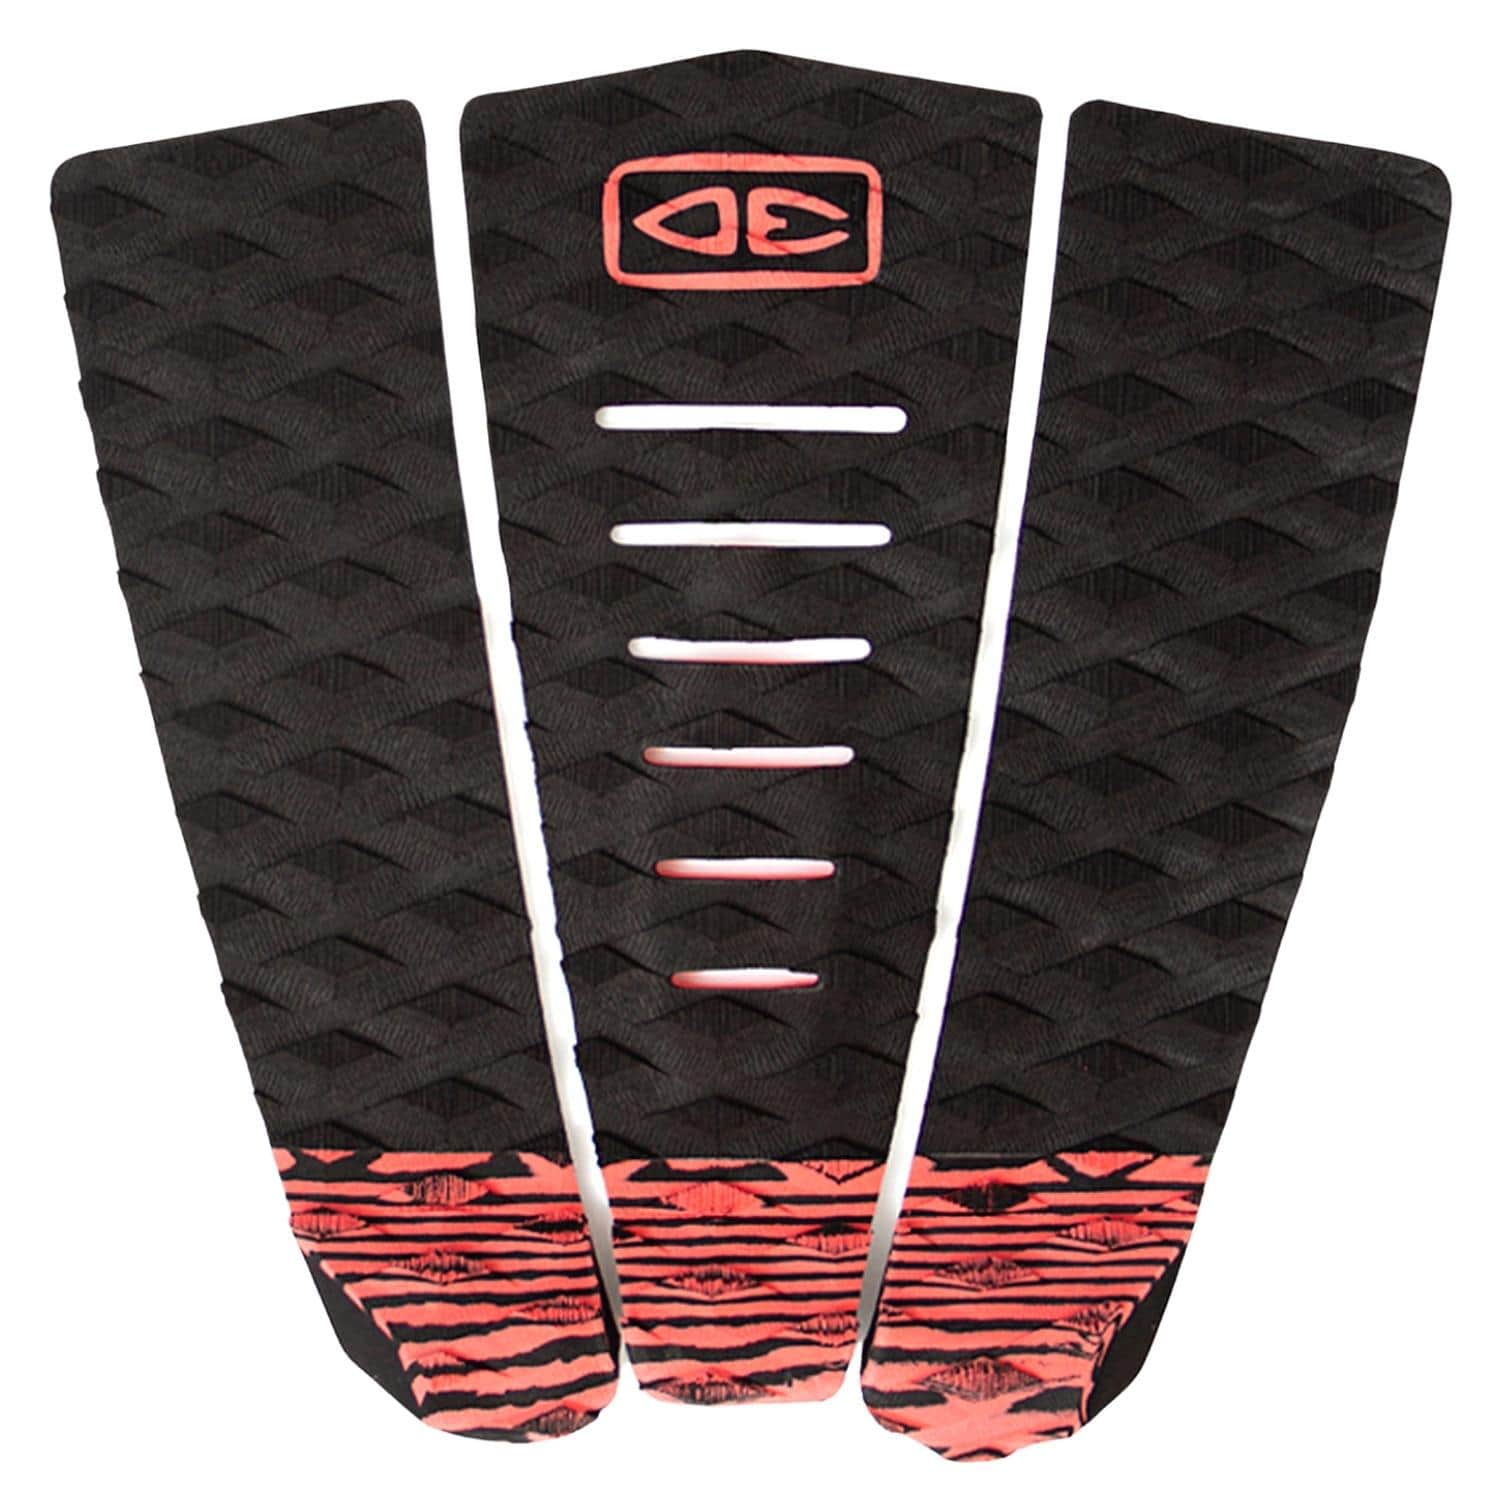 Ocean And Earth Simple Jack Surfboard Tail Pad - Black/Coral